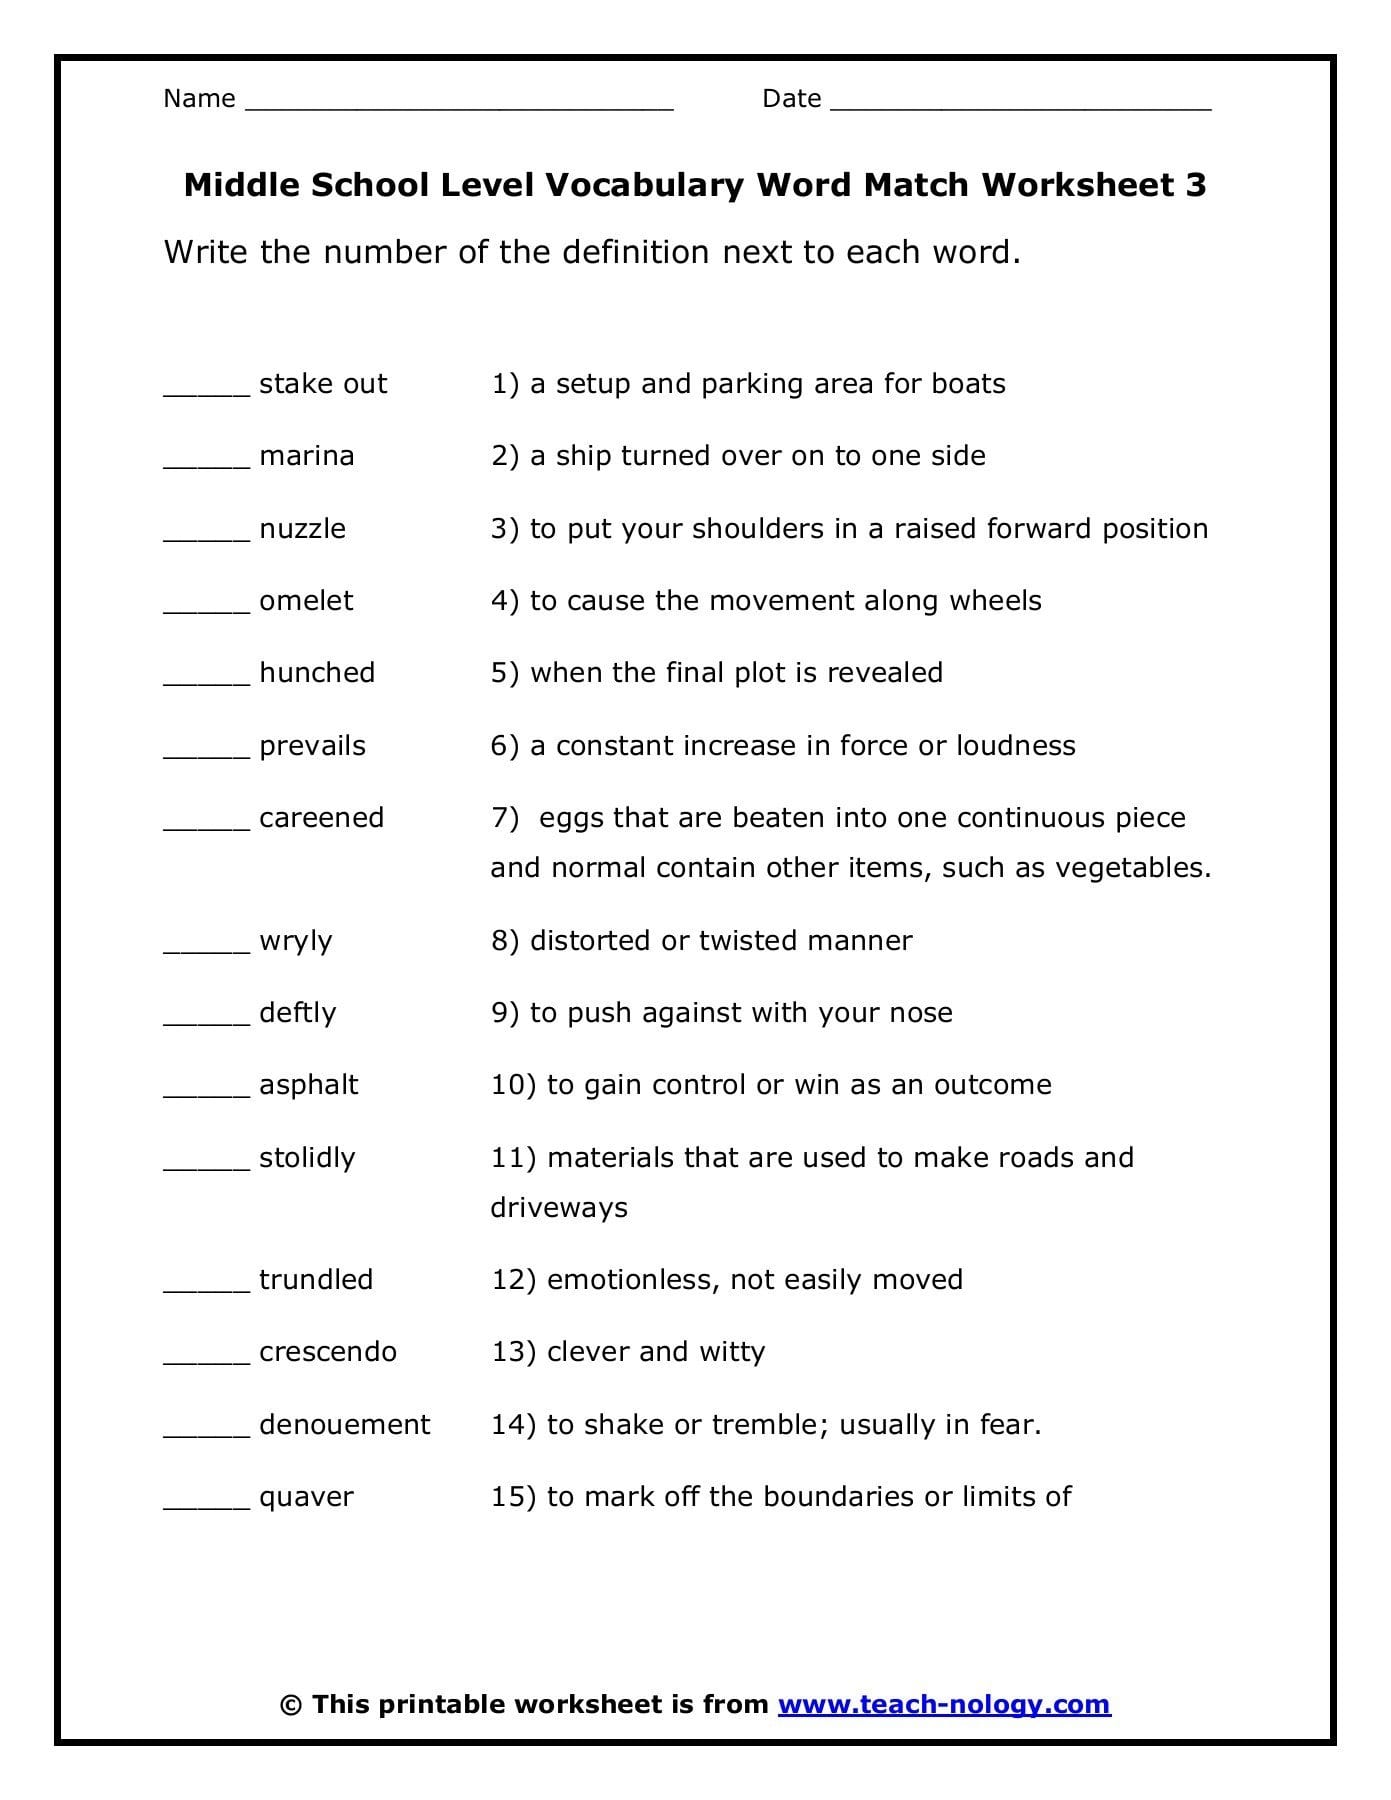 Middle School Level Vocabulary Word Match Worksheet 3 Or Vocabulary Worksheets Middle School